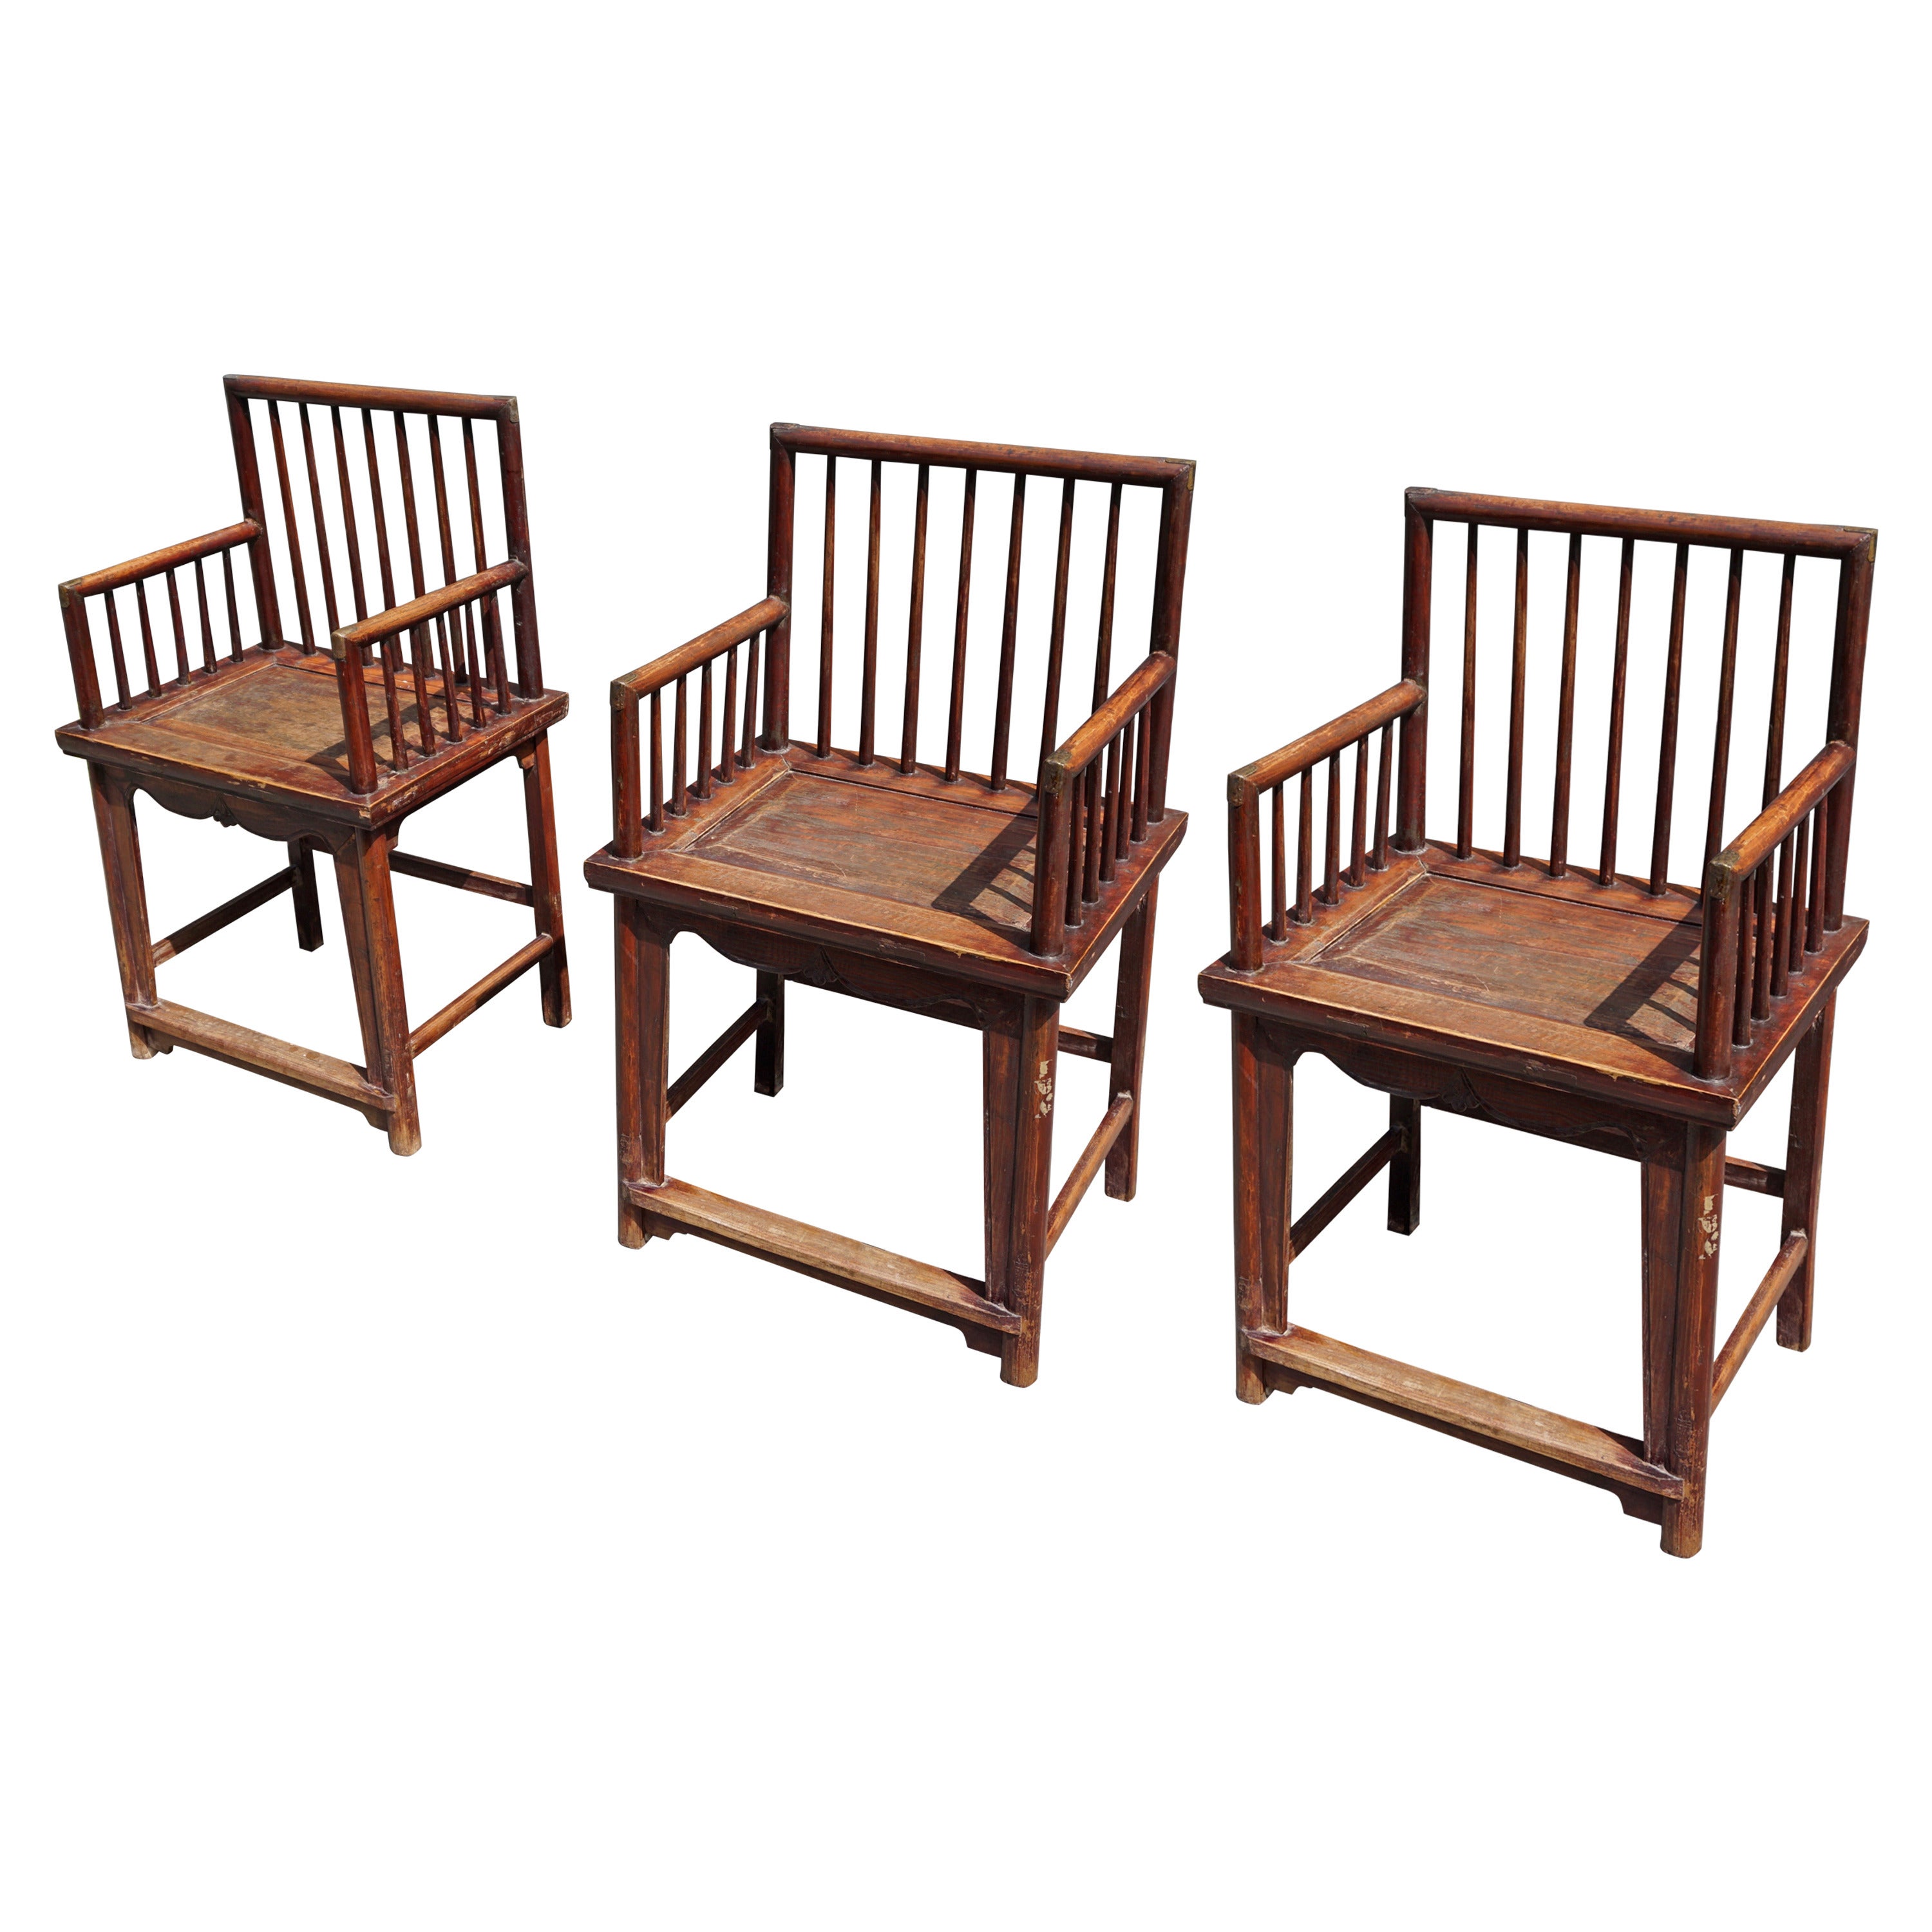 Set of Three Elegant Chinese Early 20th Century Spindle Back Chairs For Sale